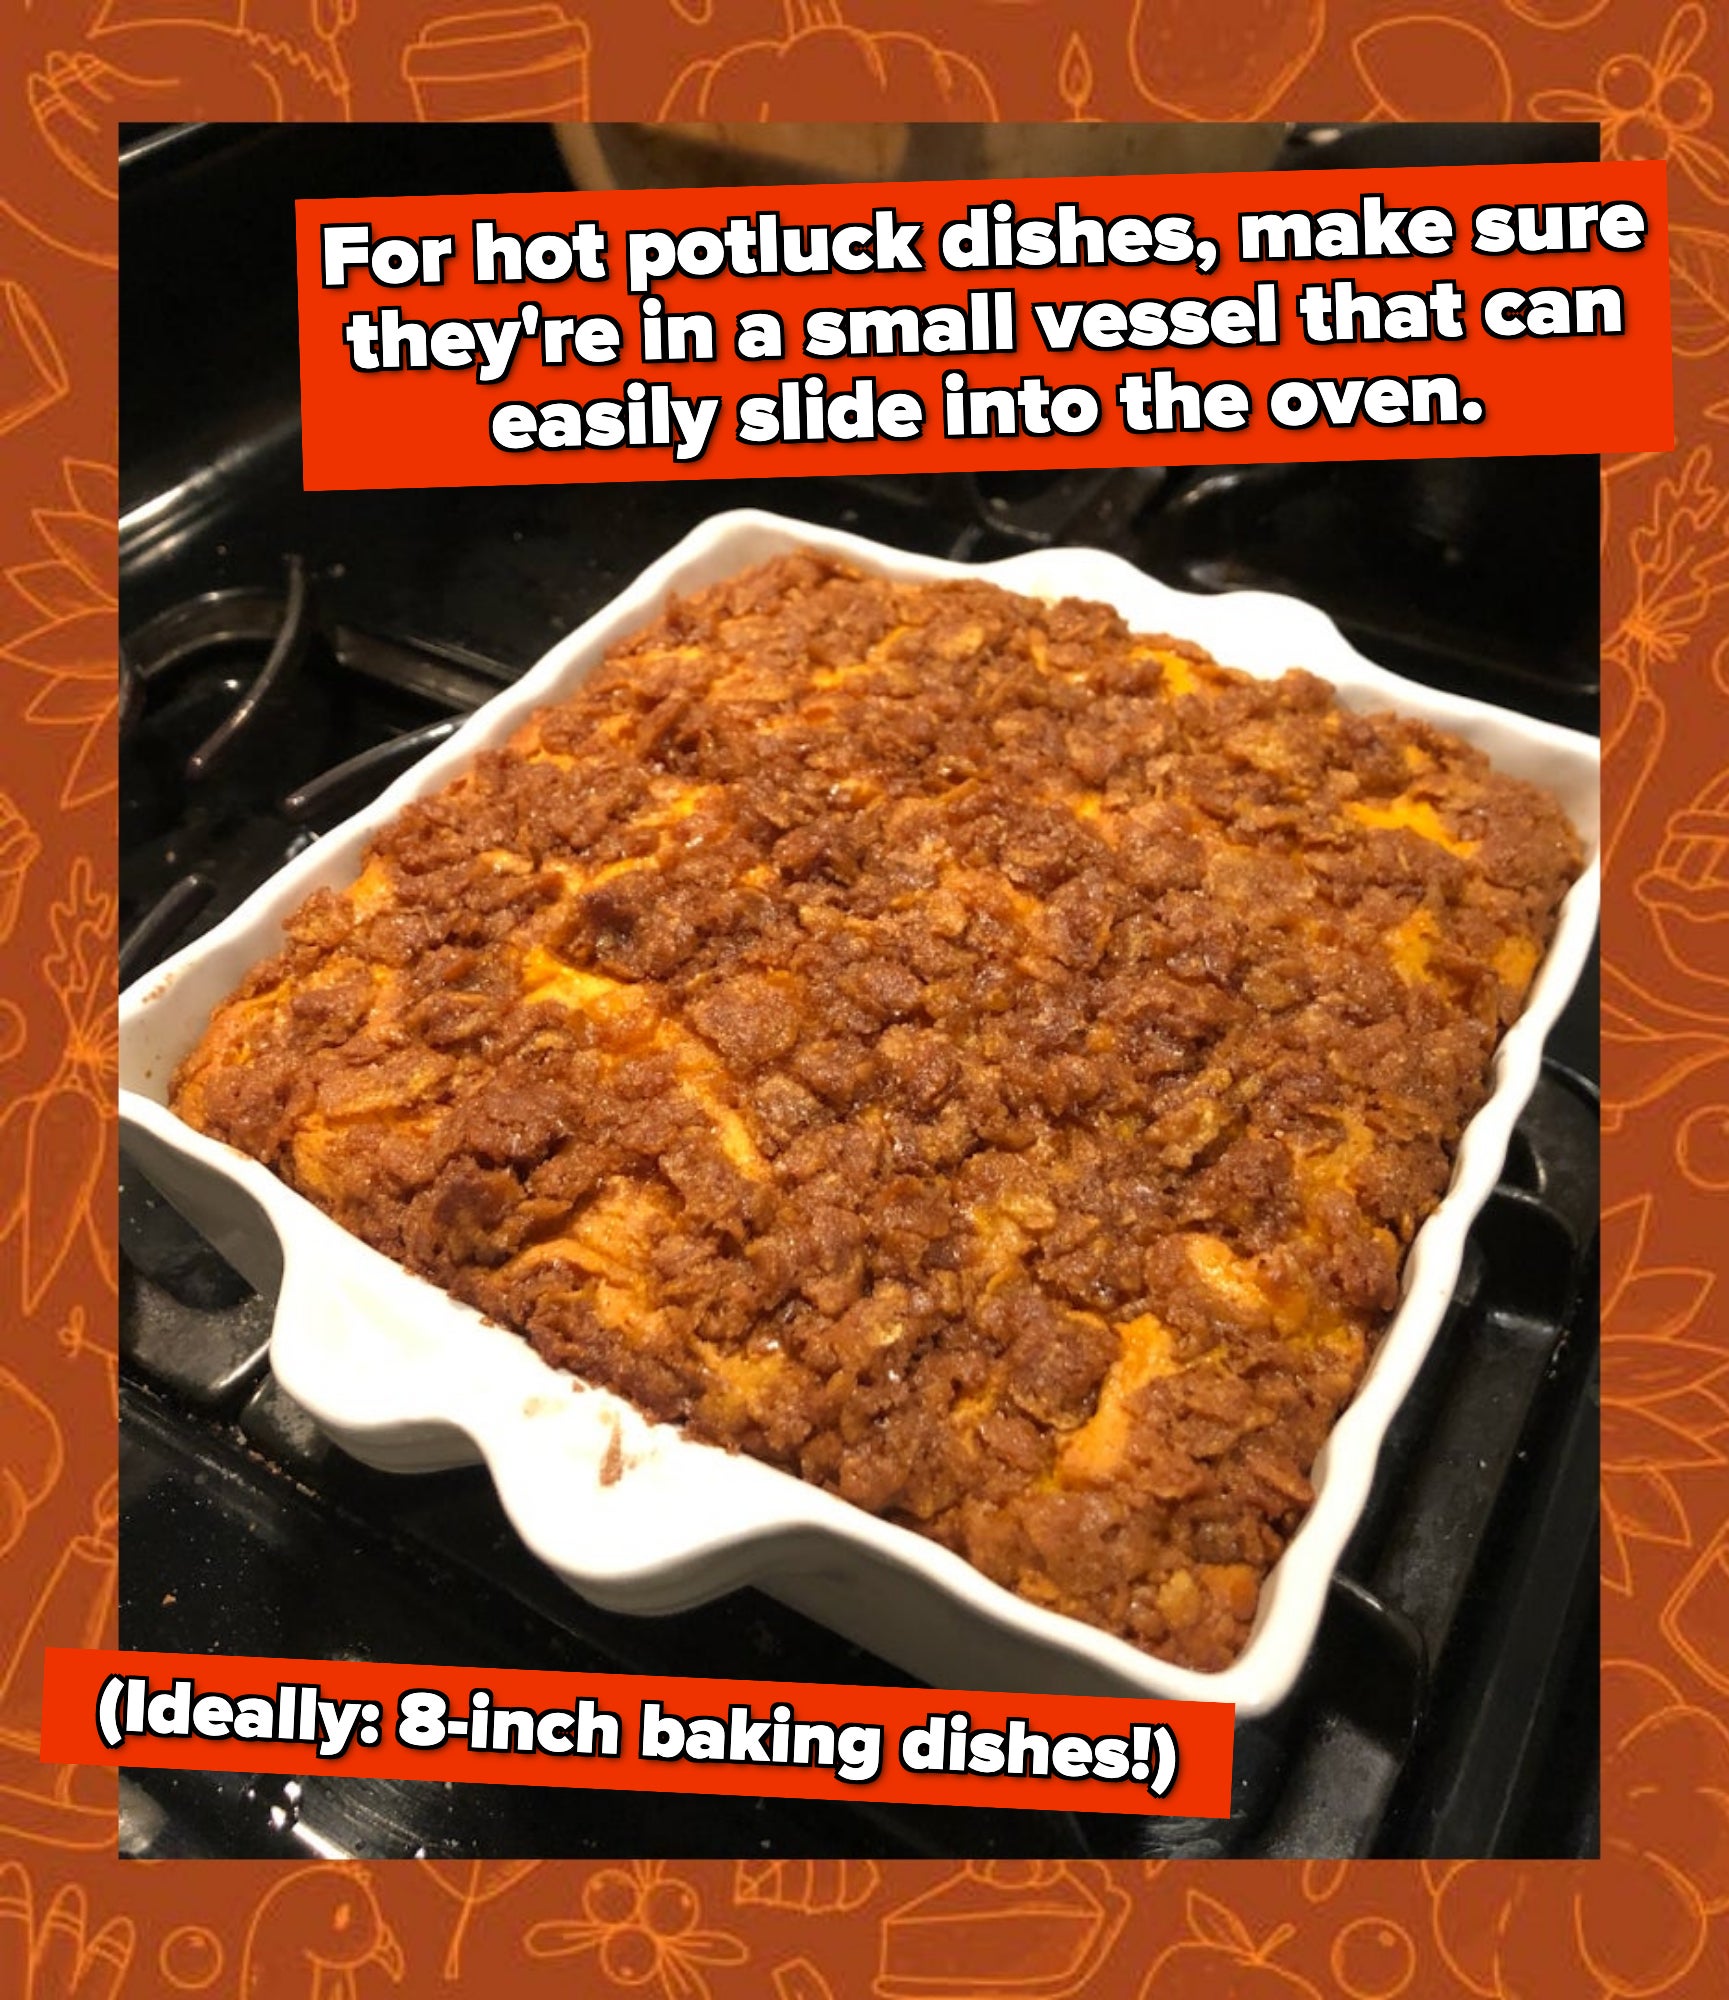 for hot potluck dishes, make sure they&#x27;re in a small vessel, like an 8-inch baking dish as shown here